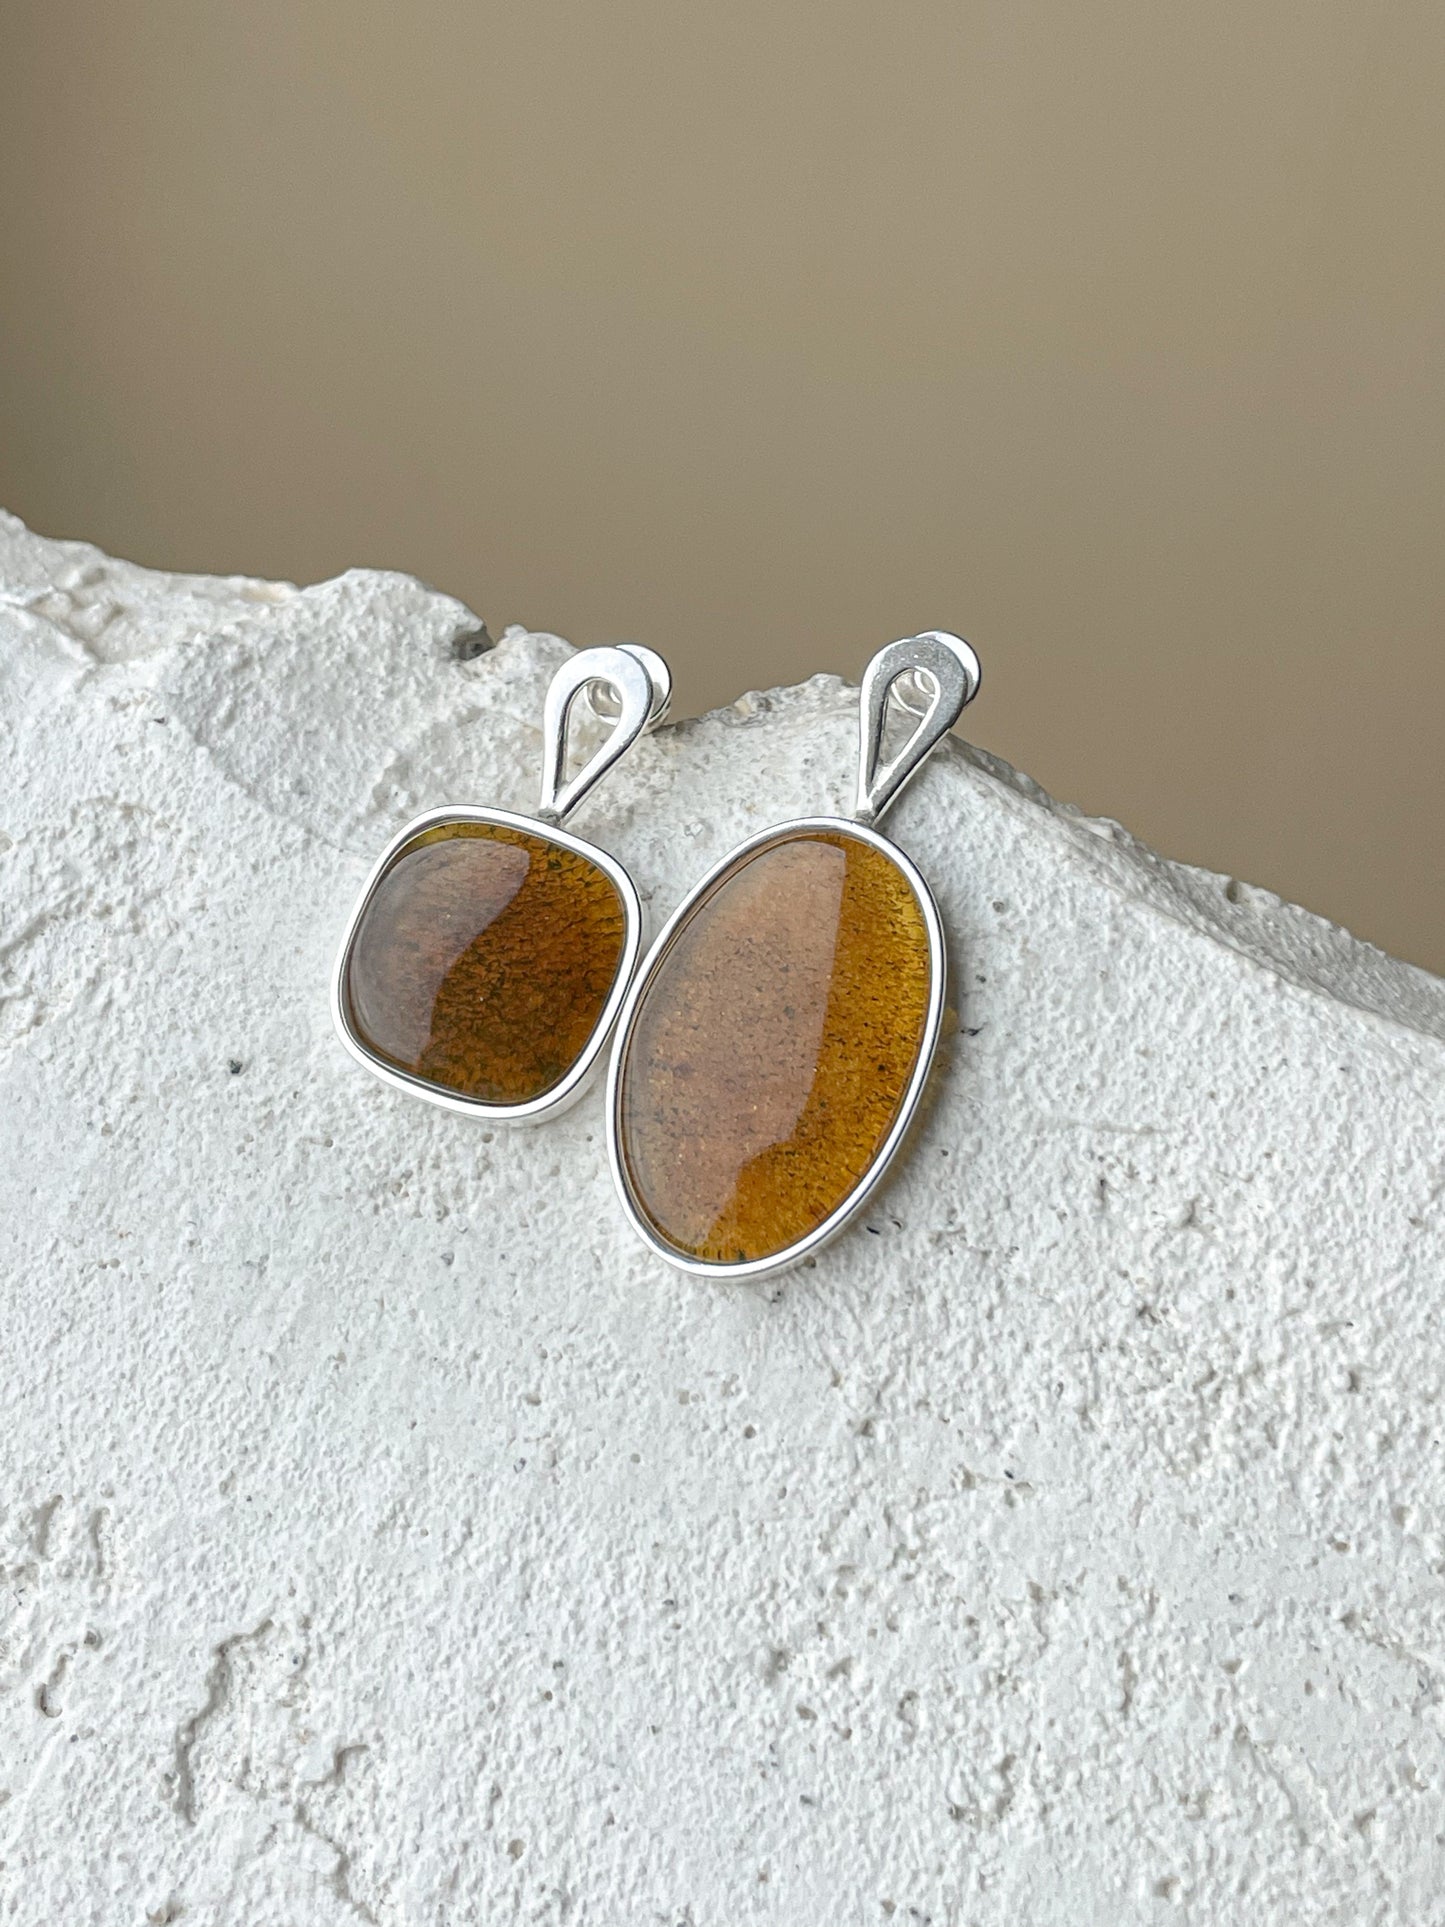 Cognac amber stud earrings - Sterling silver - Mismatched earrings collection